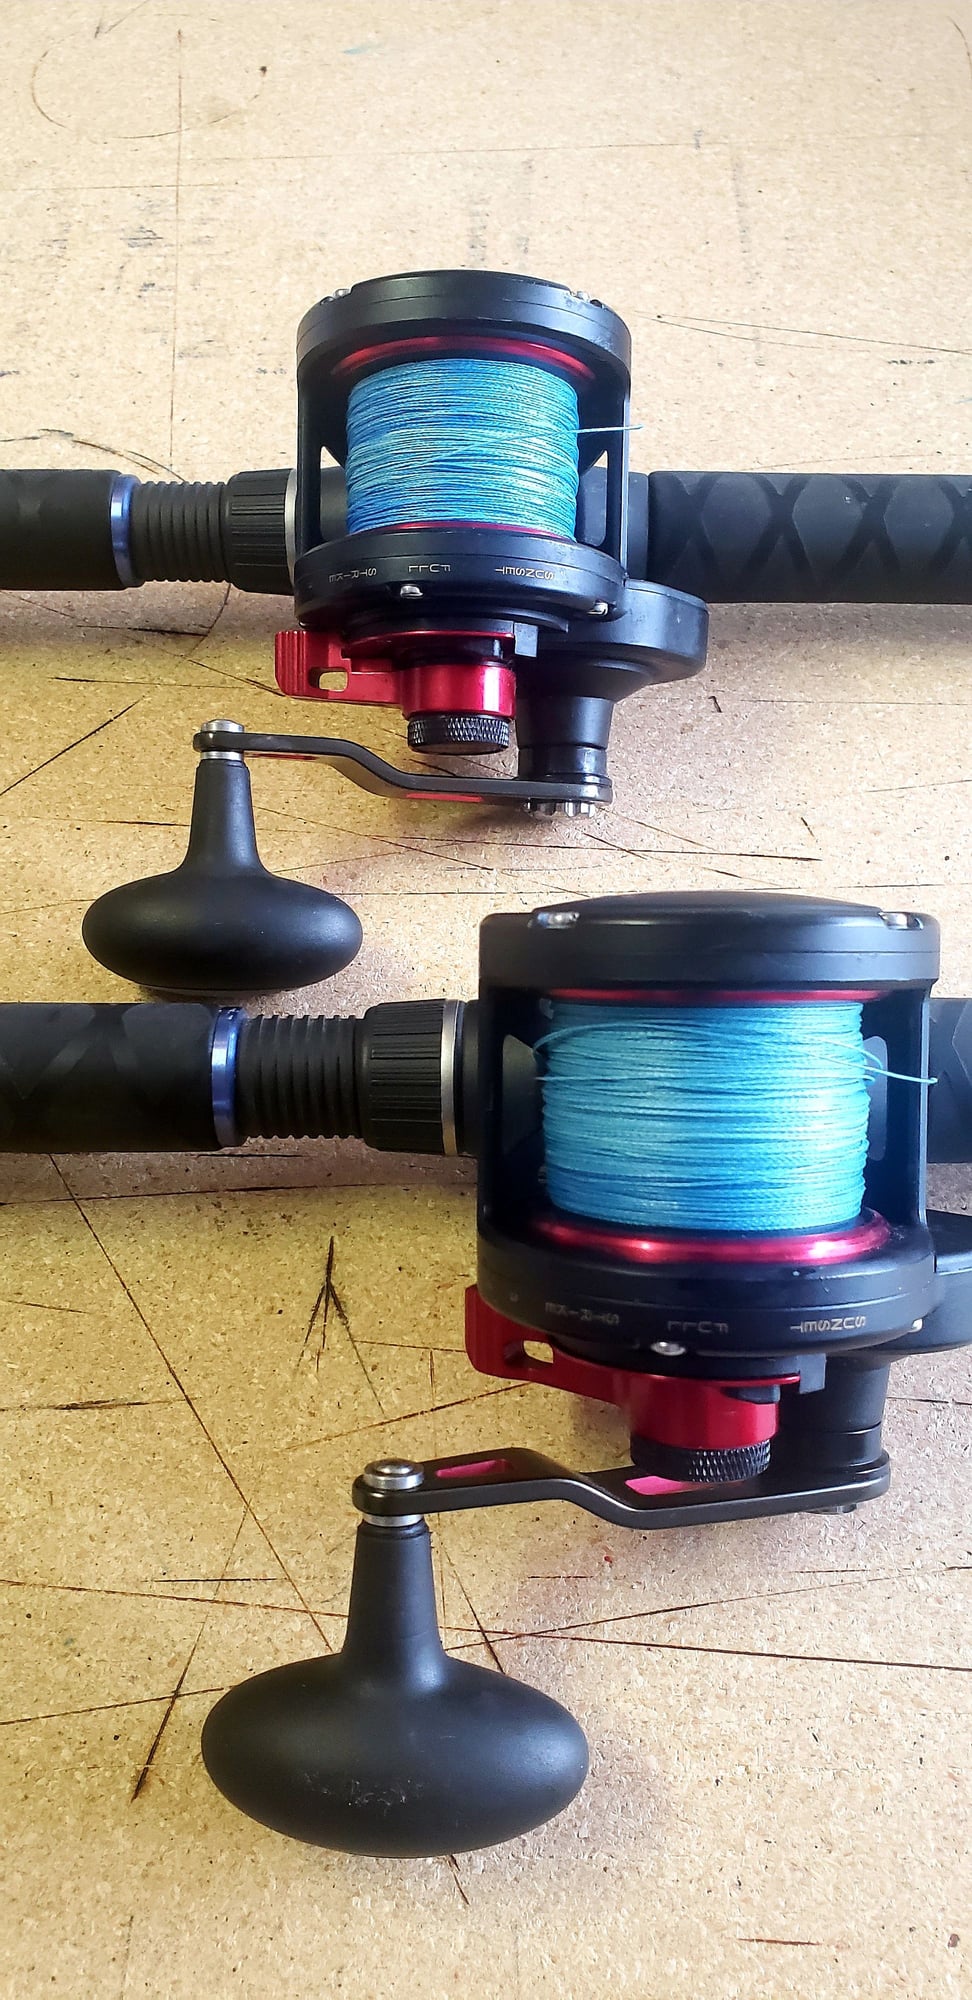 SOLD! Penn Fathom 25NLD - Tsunami Airwave Combos (2) - SOLD - The